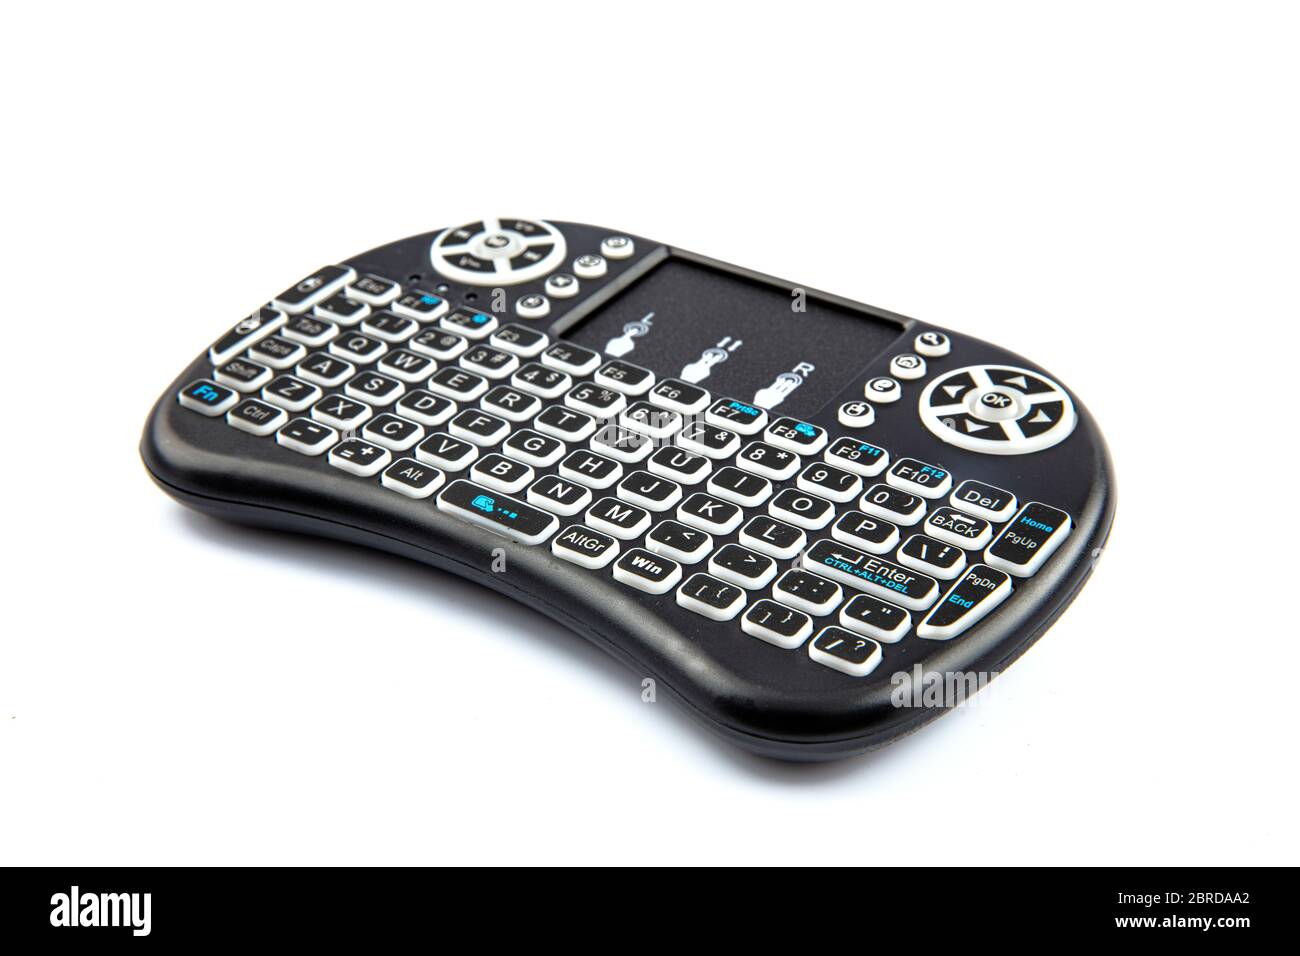 Usb Mini Keyboard or Wireless mini keyboard black color for computer, TV, smart  TV, Android TV. Isolated object on white background Stock Photo - Alamy